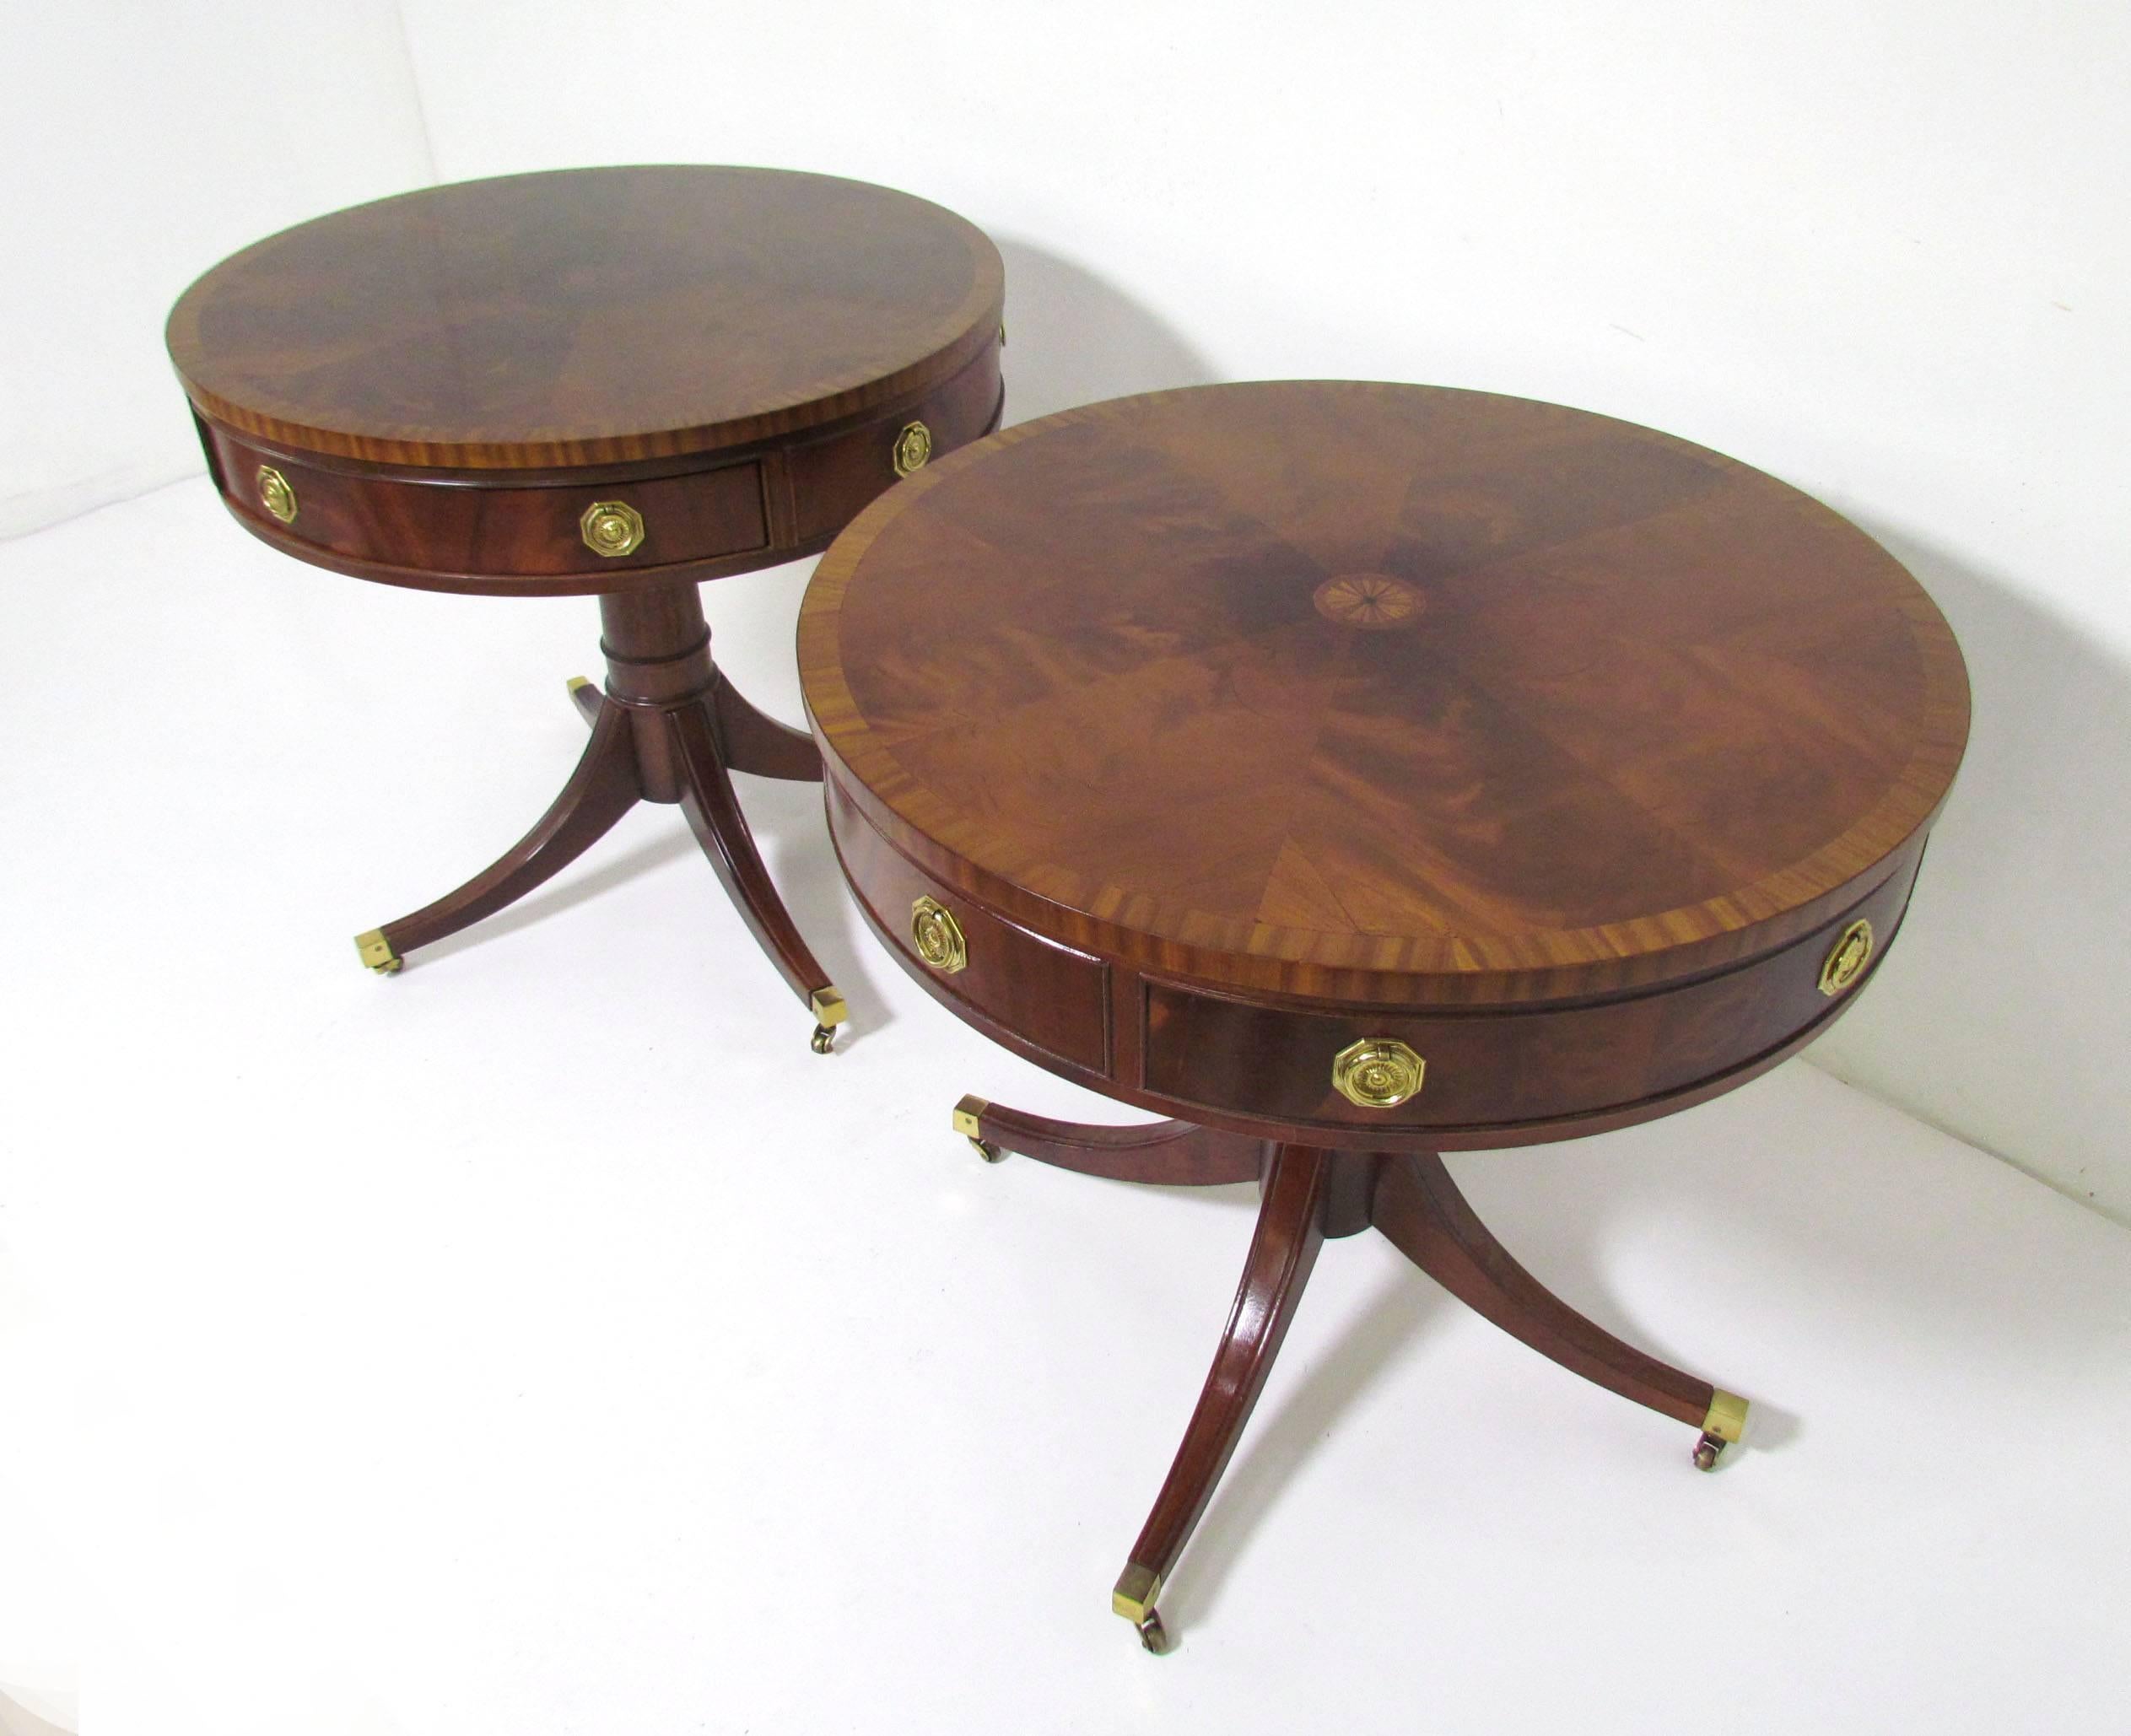 Pair of pedestal drum tables from the historic James River collection by Hickory Chair, circa 1980s. Each with a single drawer. Extremely high level of craftsmanship in these pieces. With crotch mahogany top and solid brass hardware.